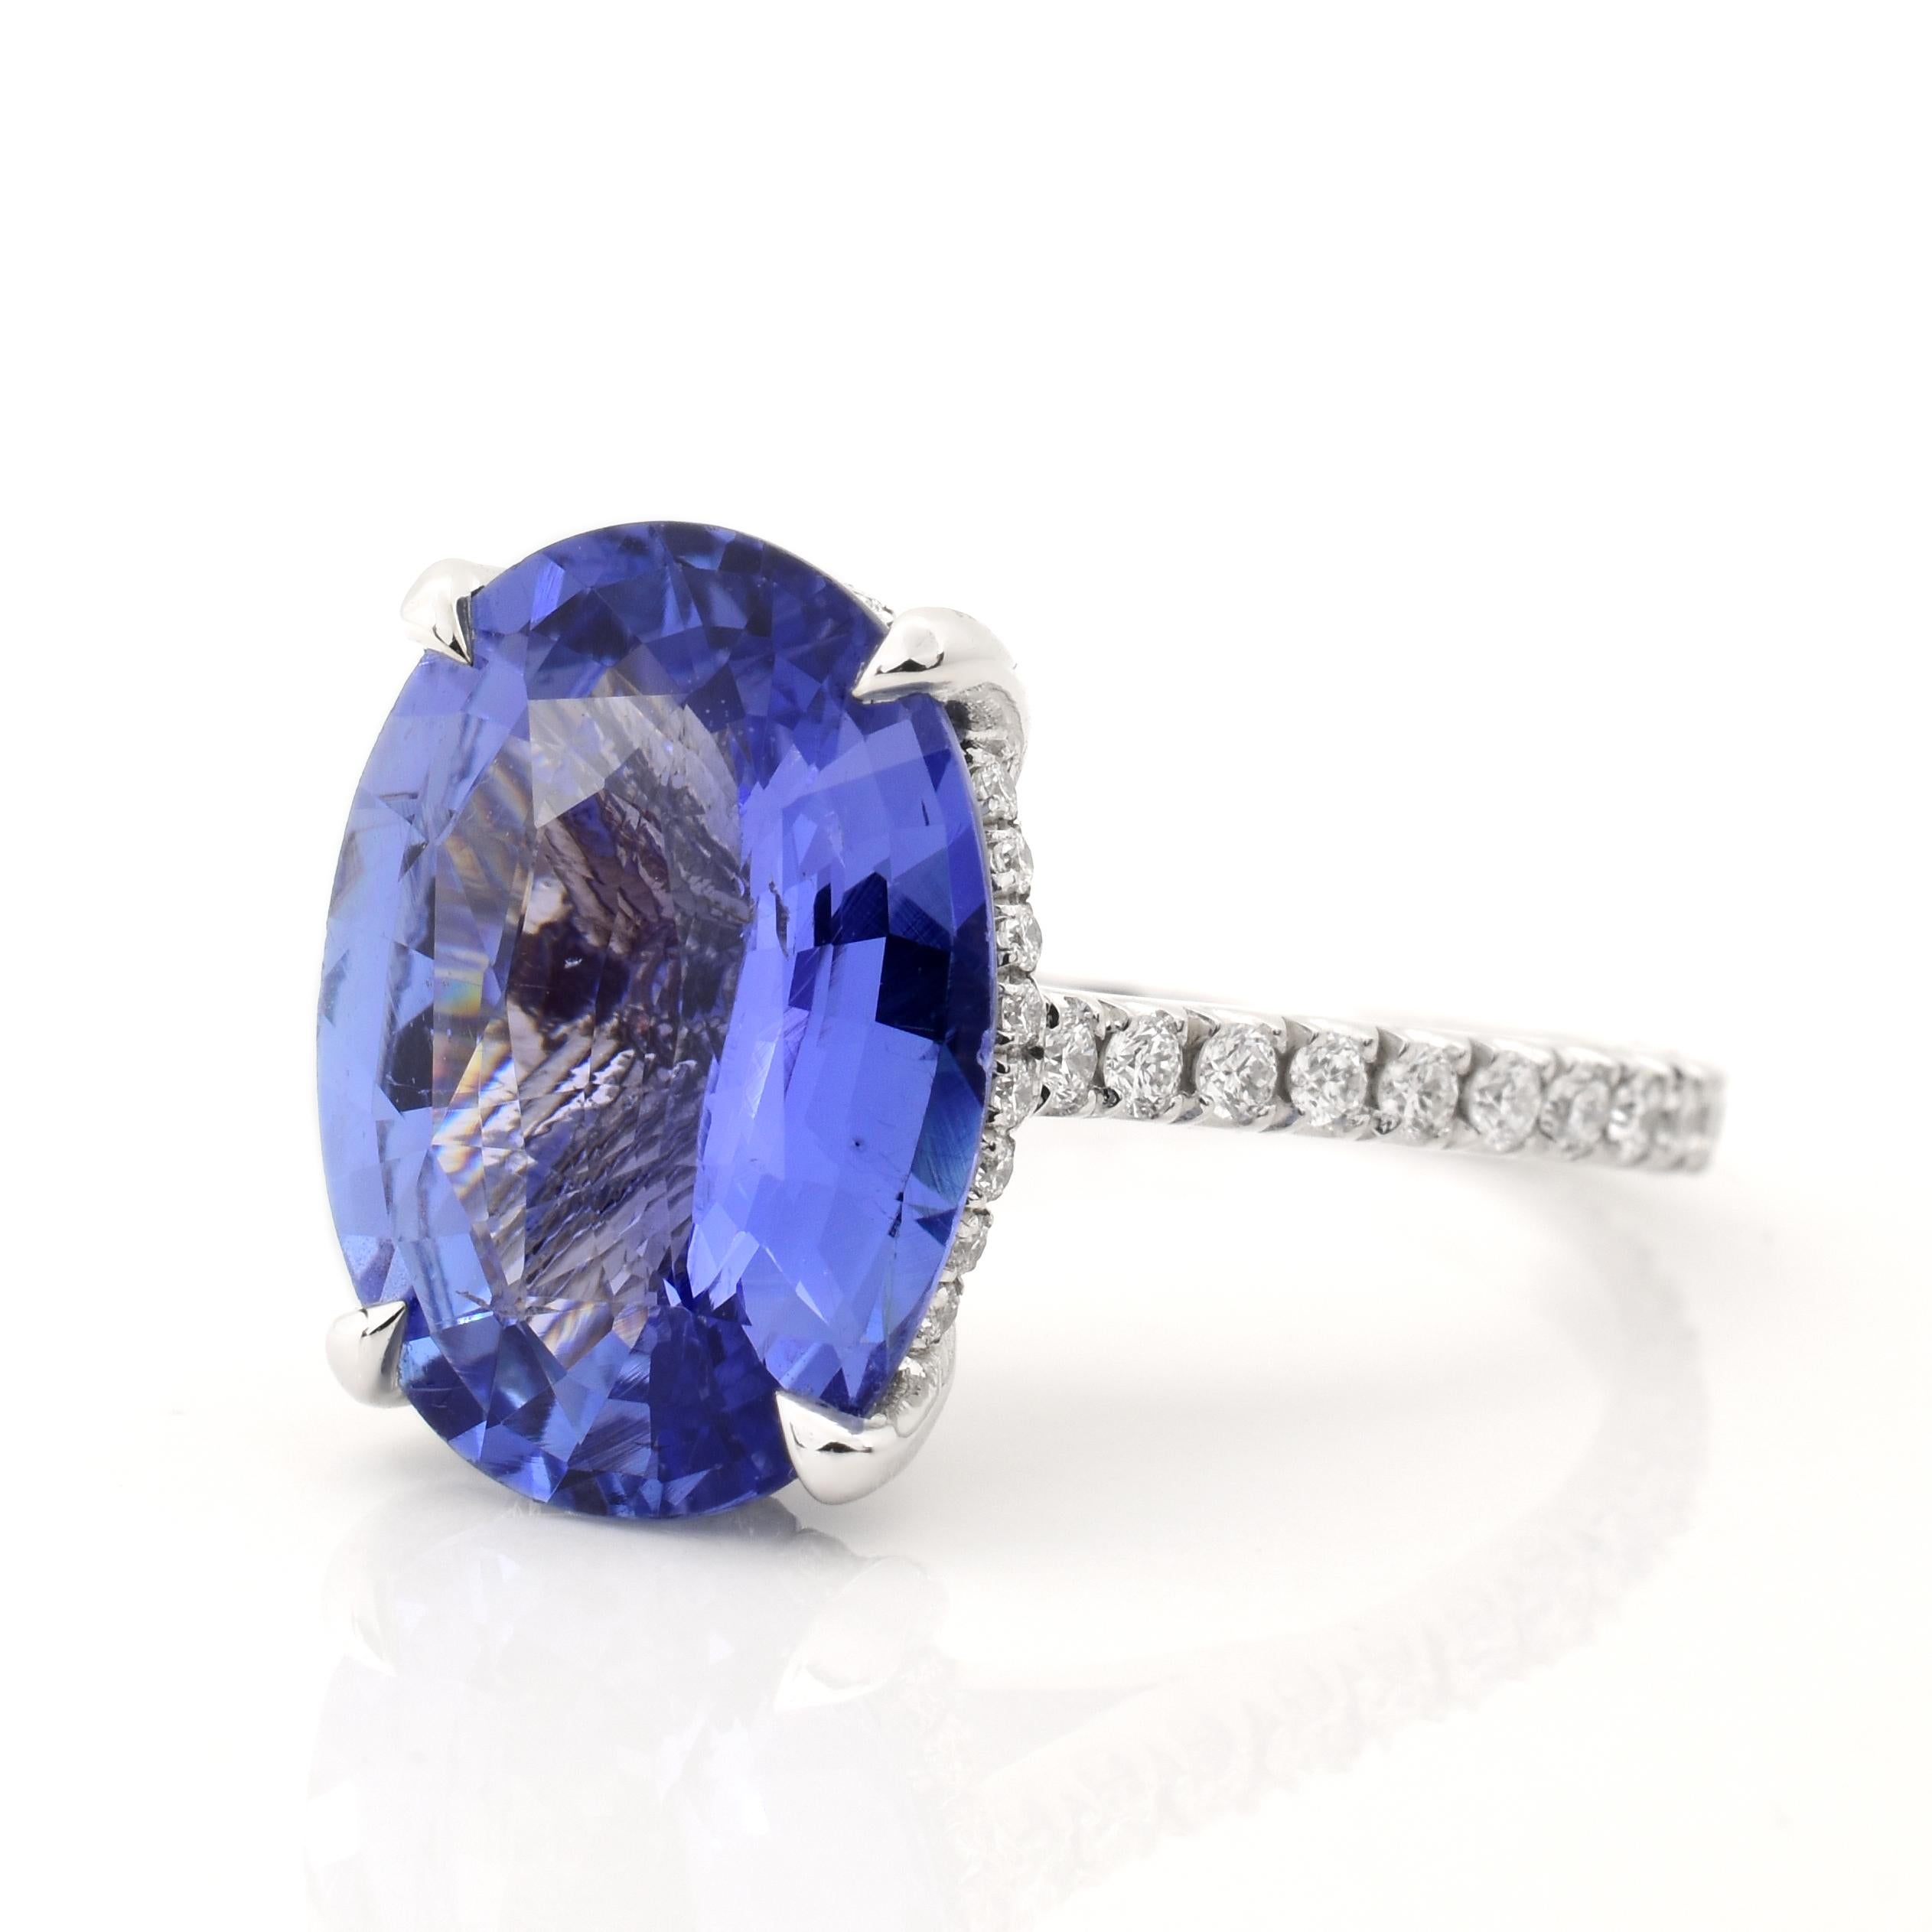 A modern ring in 18k white gold, featuring a 6.11 carat natural light blue sapphire (GIA Report No. 2193418320). There are .50 carats in accent diamonds set around the sides and underside of the basket, down the shank, and directly underneath the